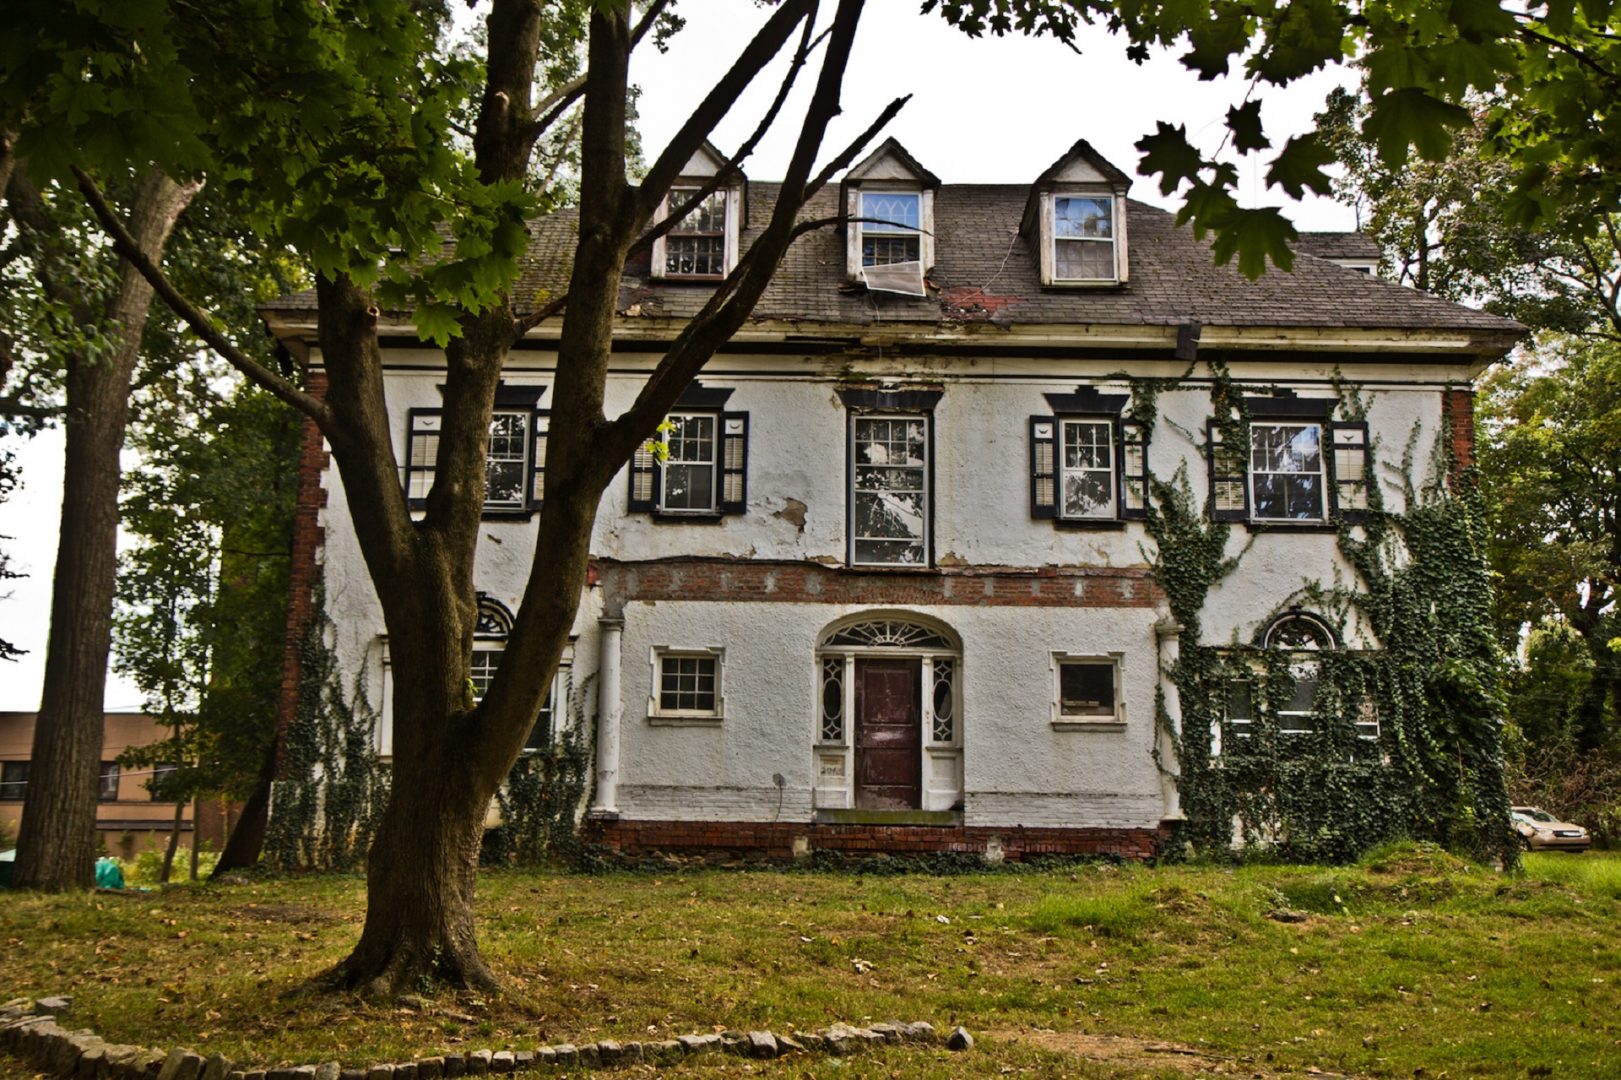 An historic home in need of repair on Upland Way in Overbrook.